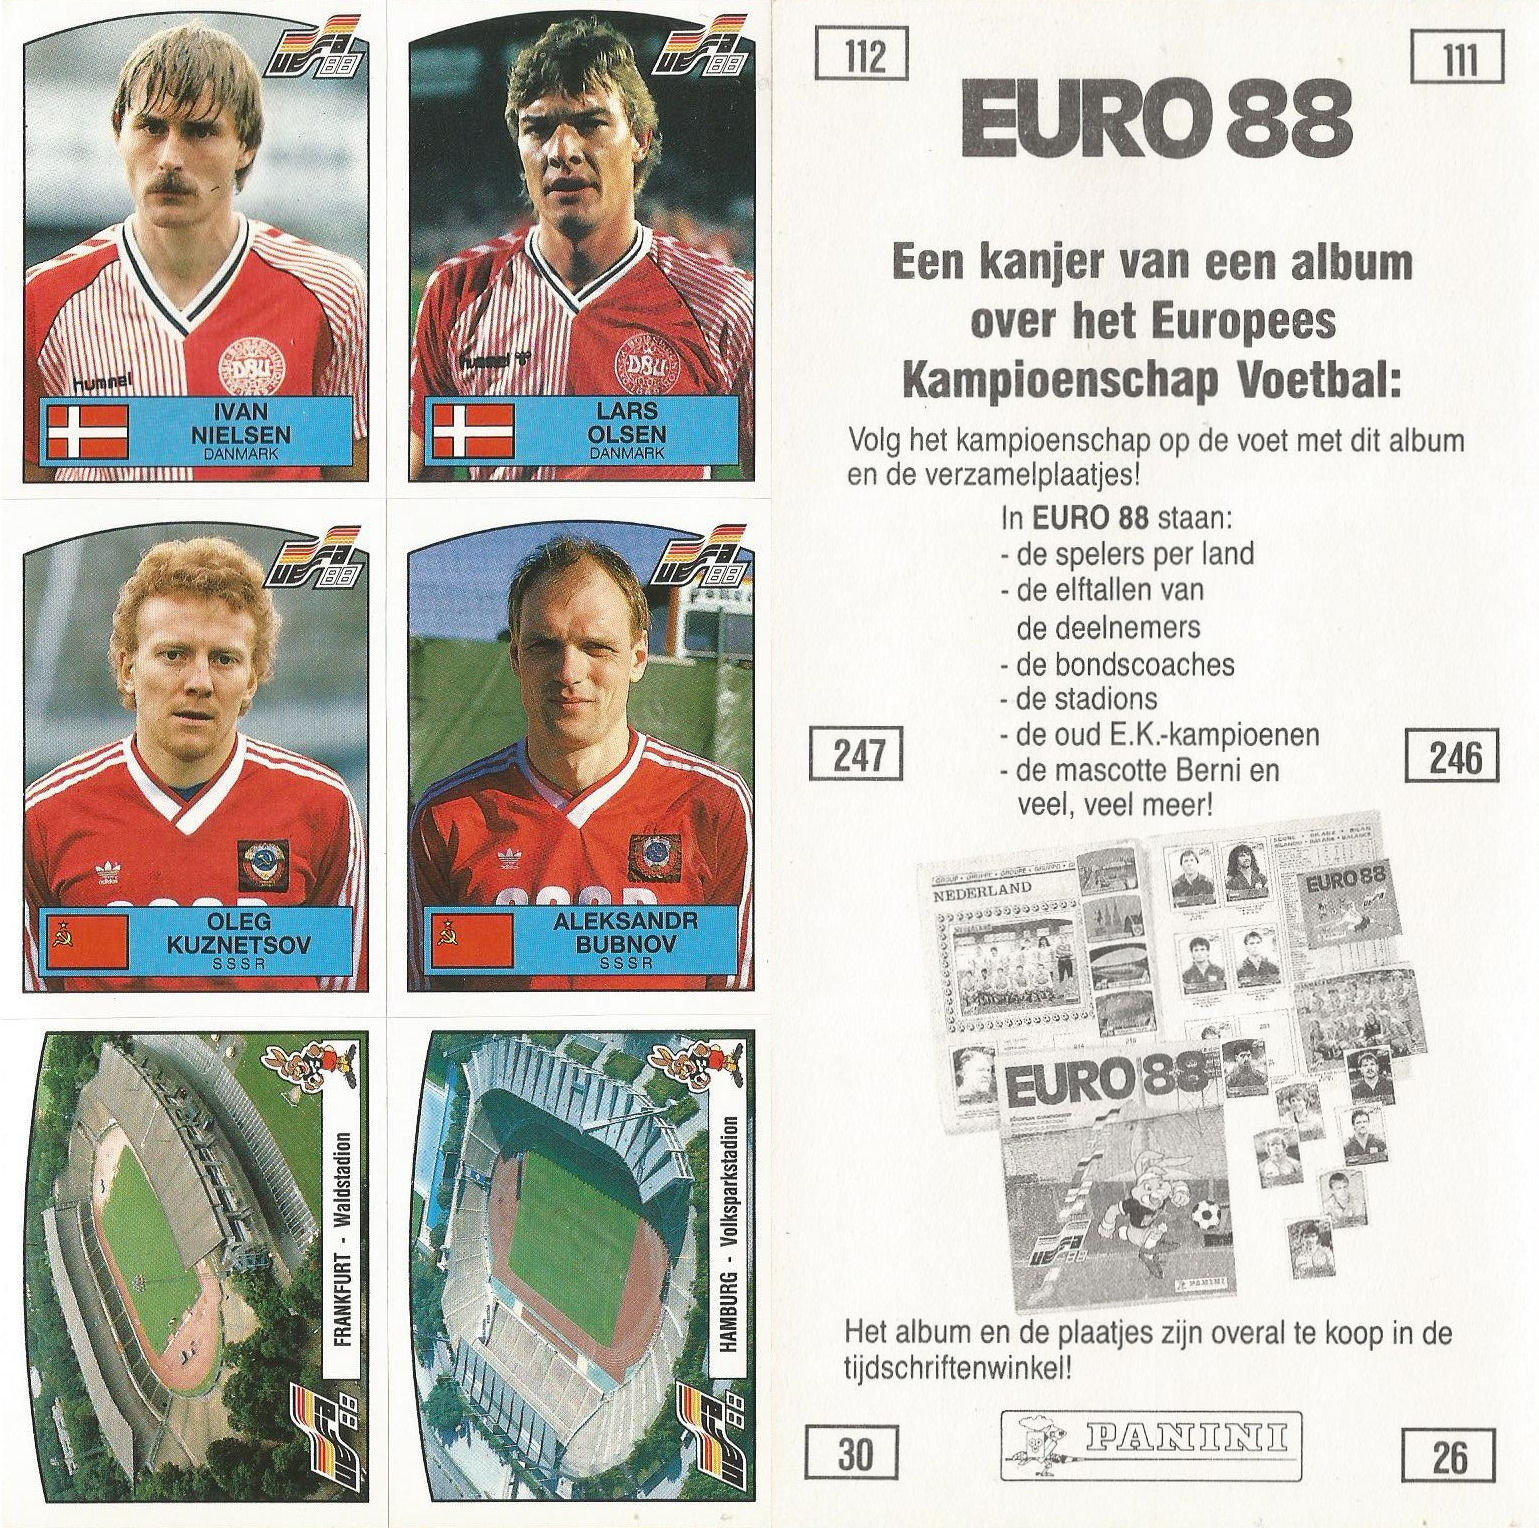 113 DENMARK HEINTZE WITH BACK VERY GOOD Panini EURO 88 N MINT CONDITION!!! 